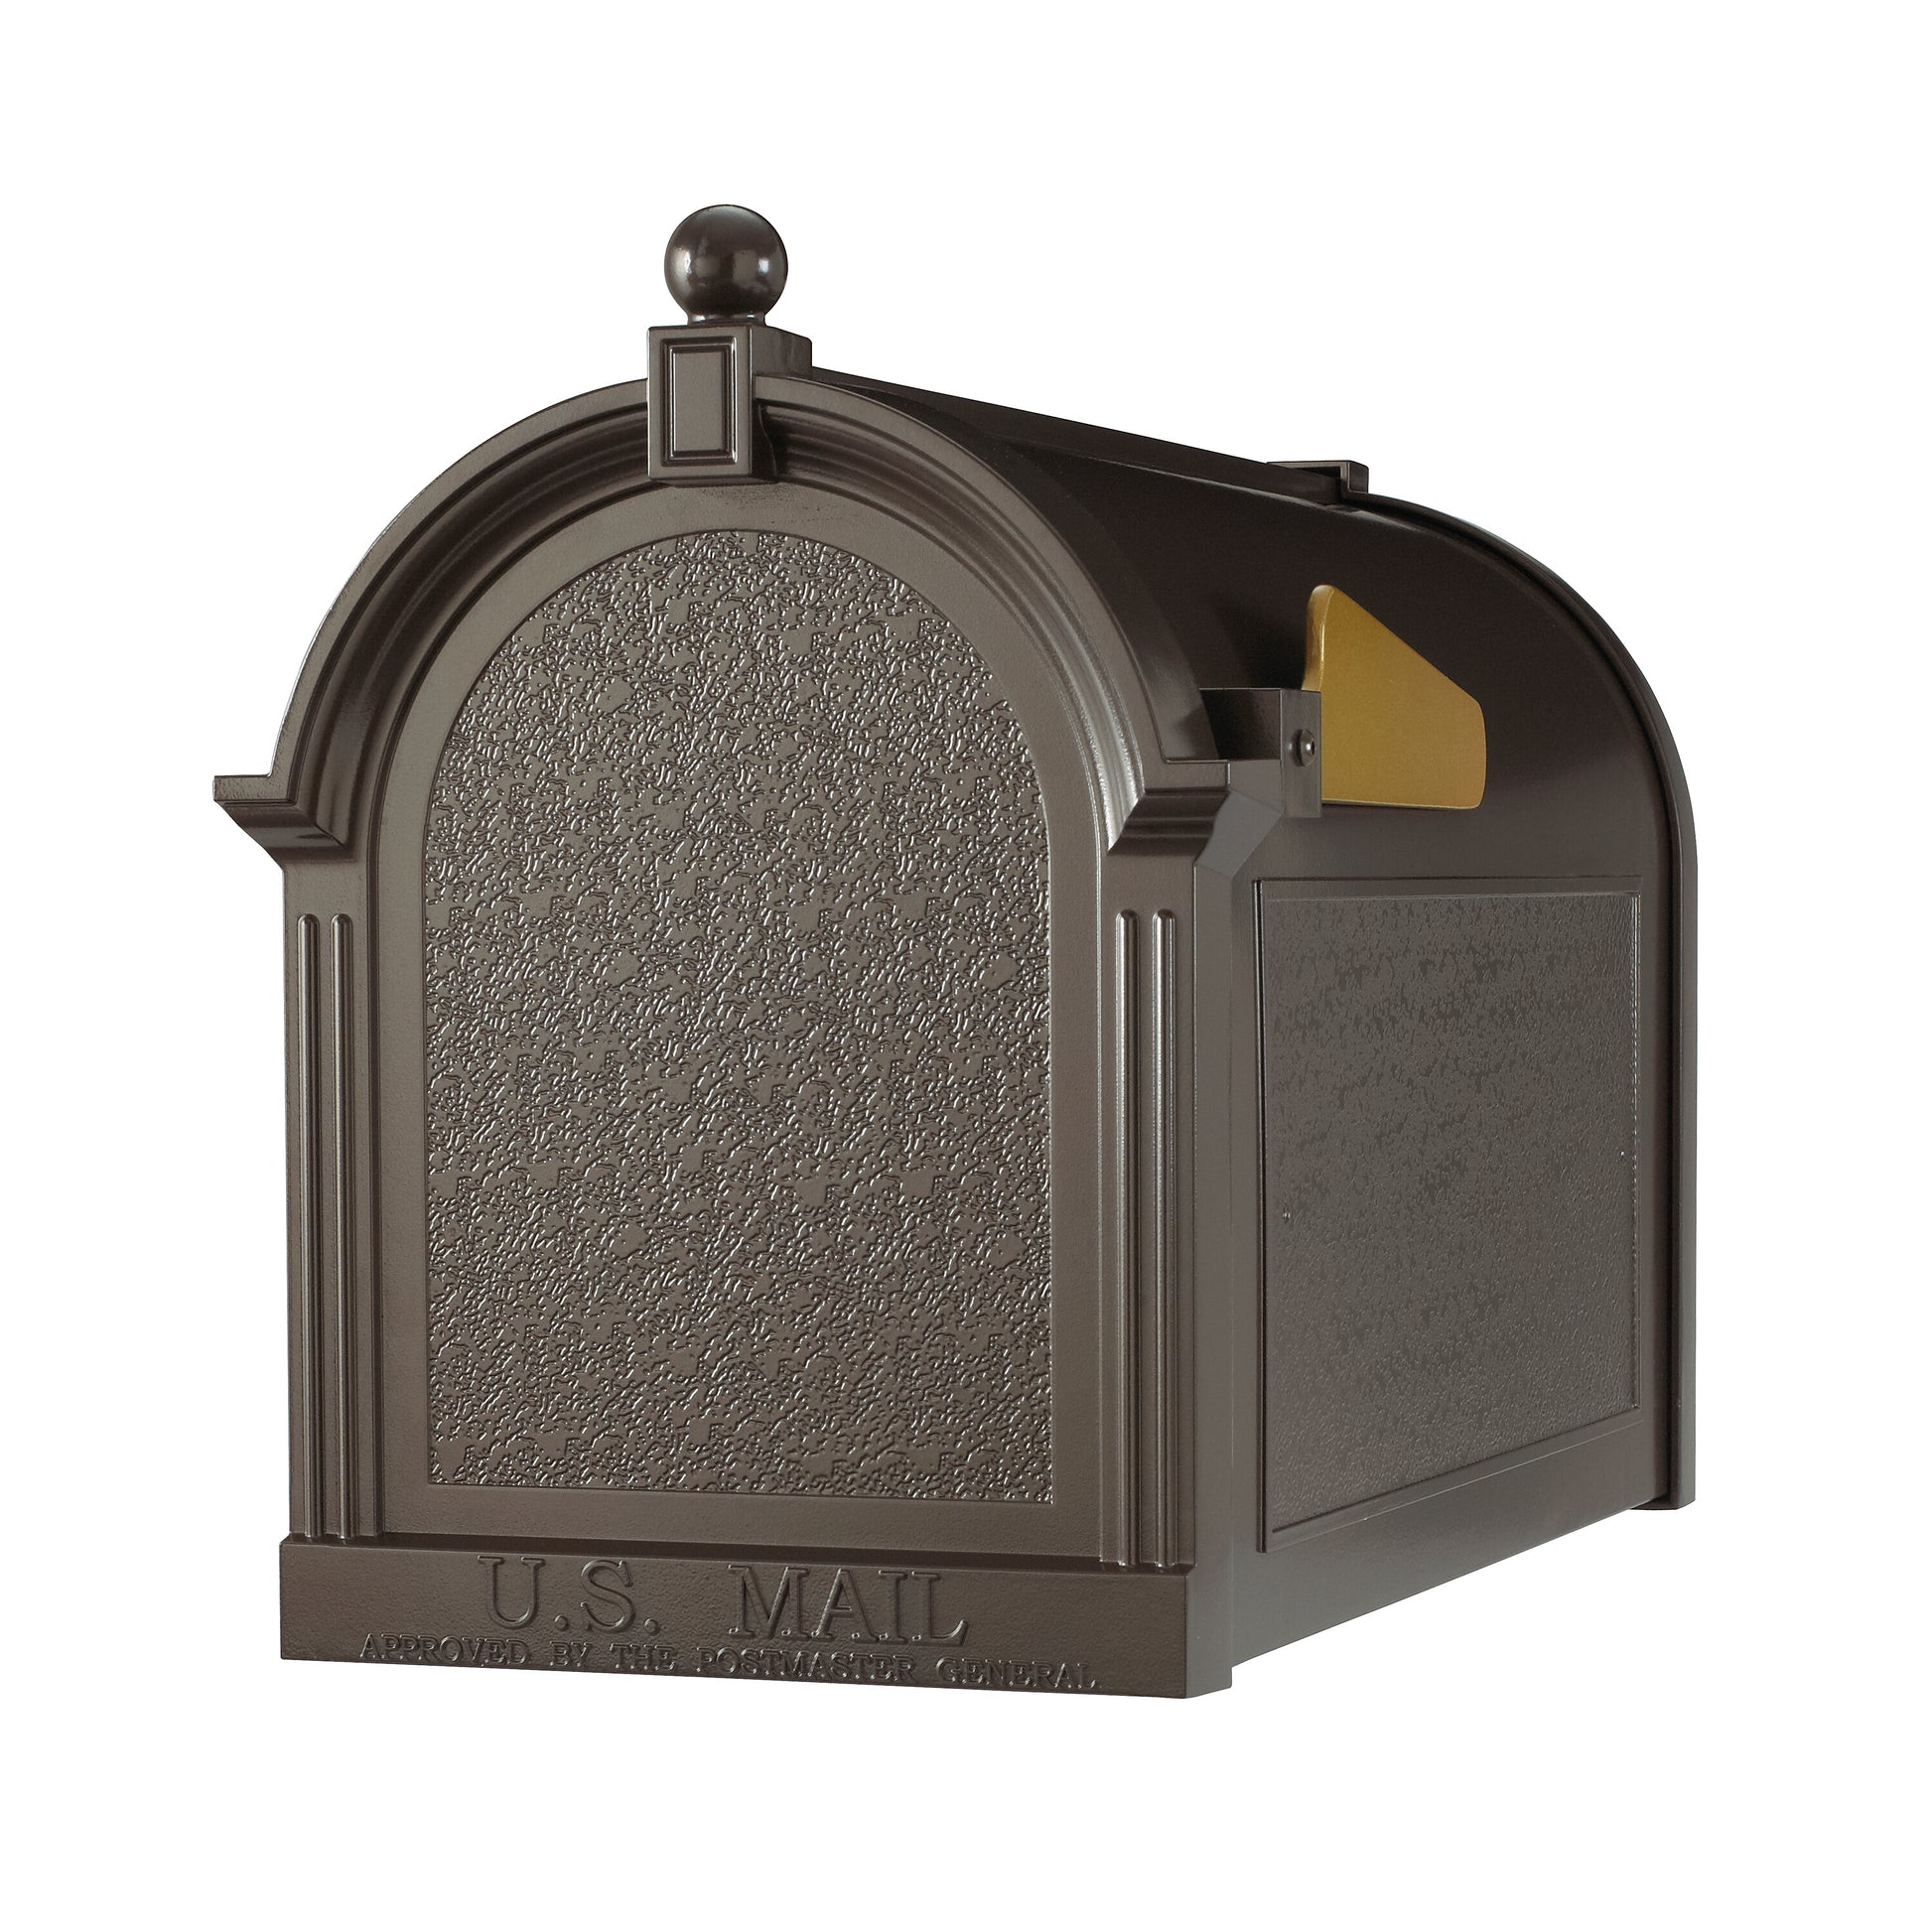 Whitehall Products Capitol Mailbox White